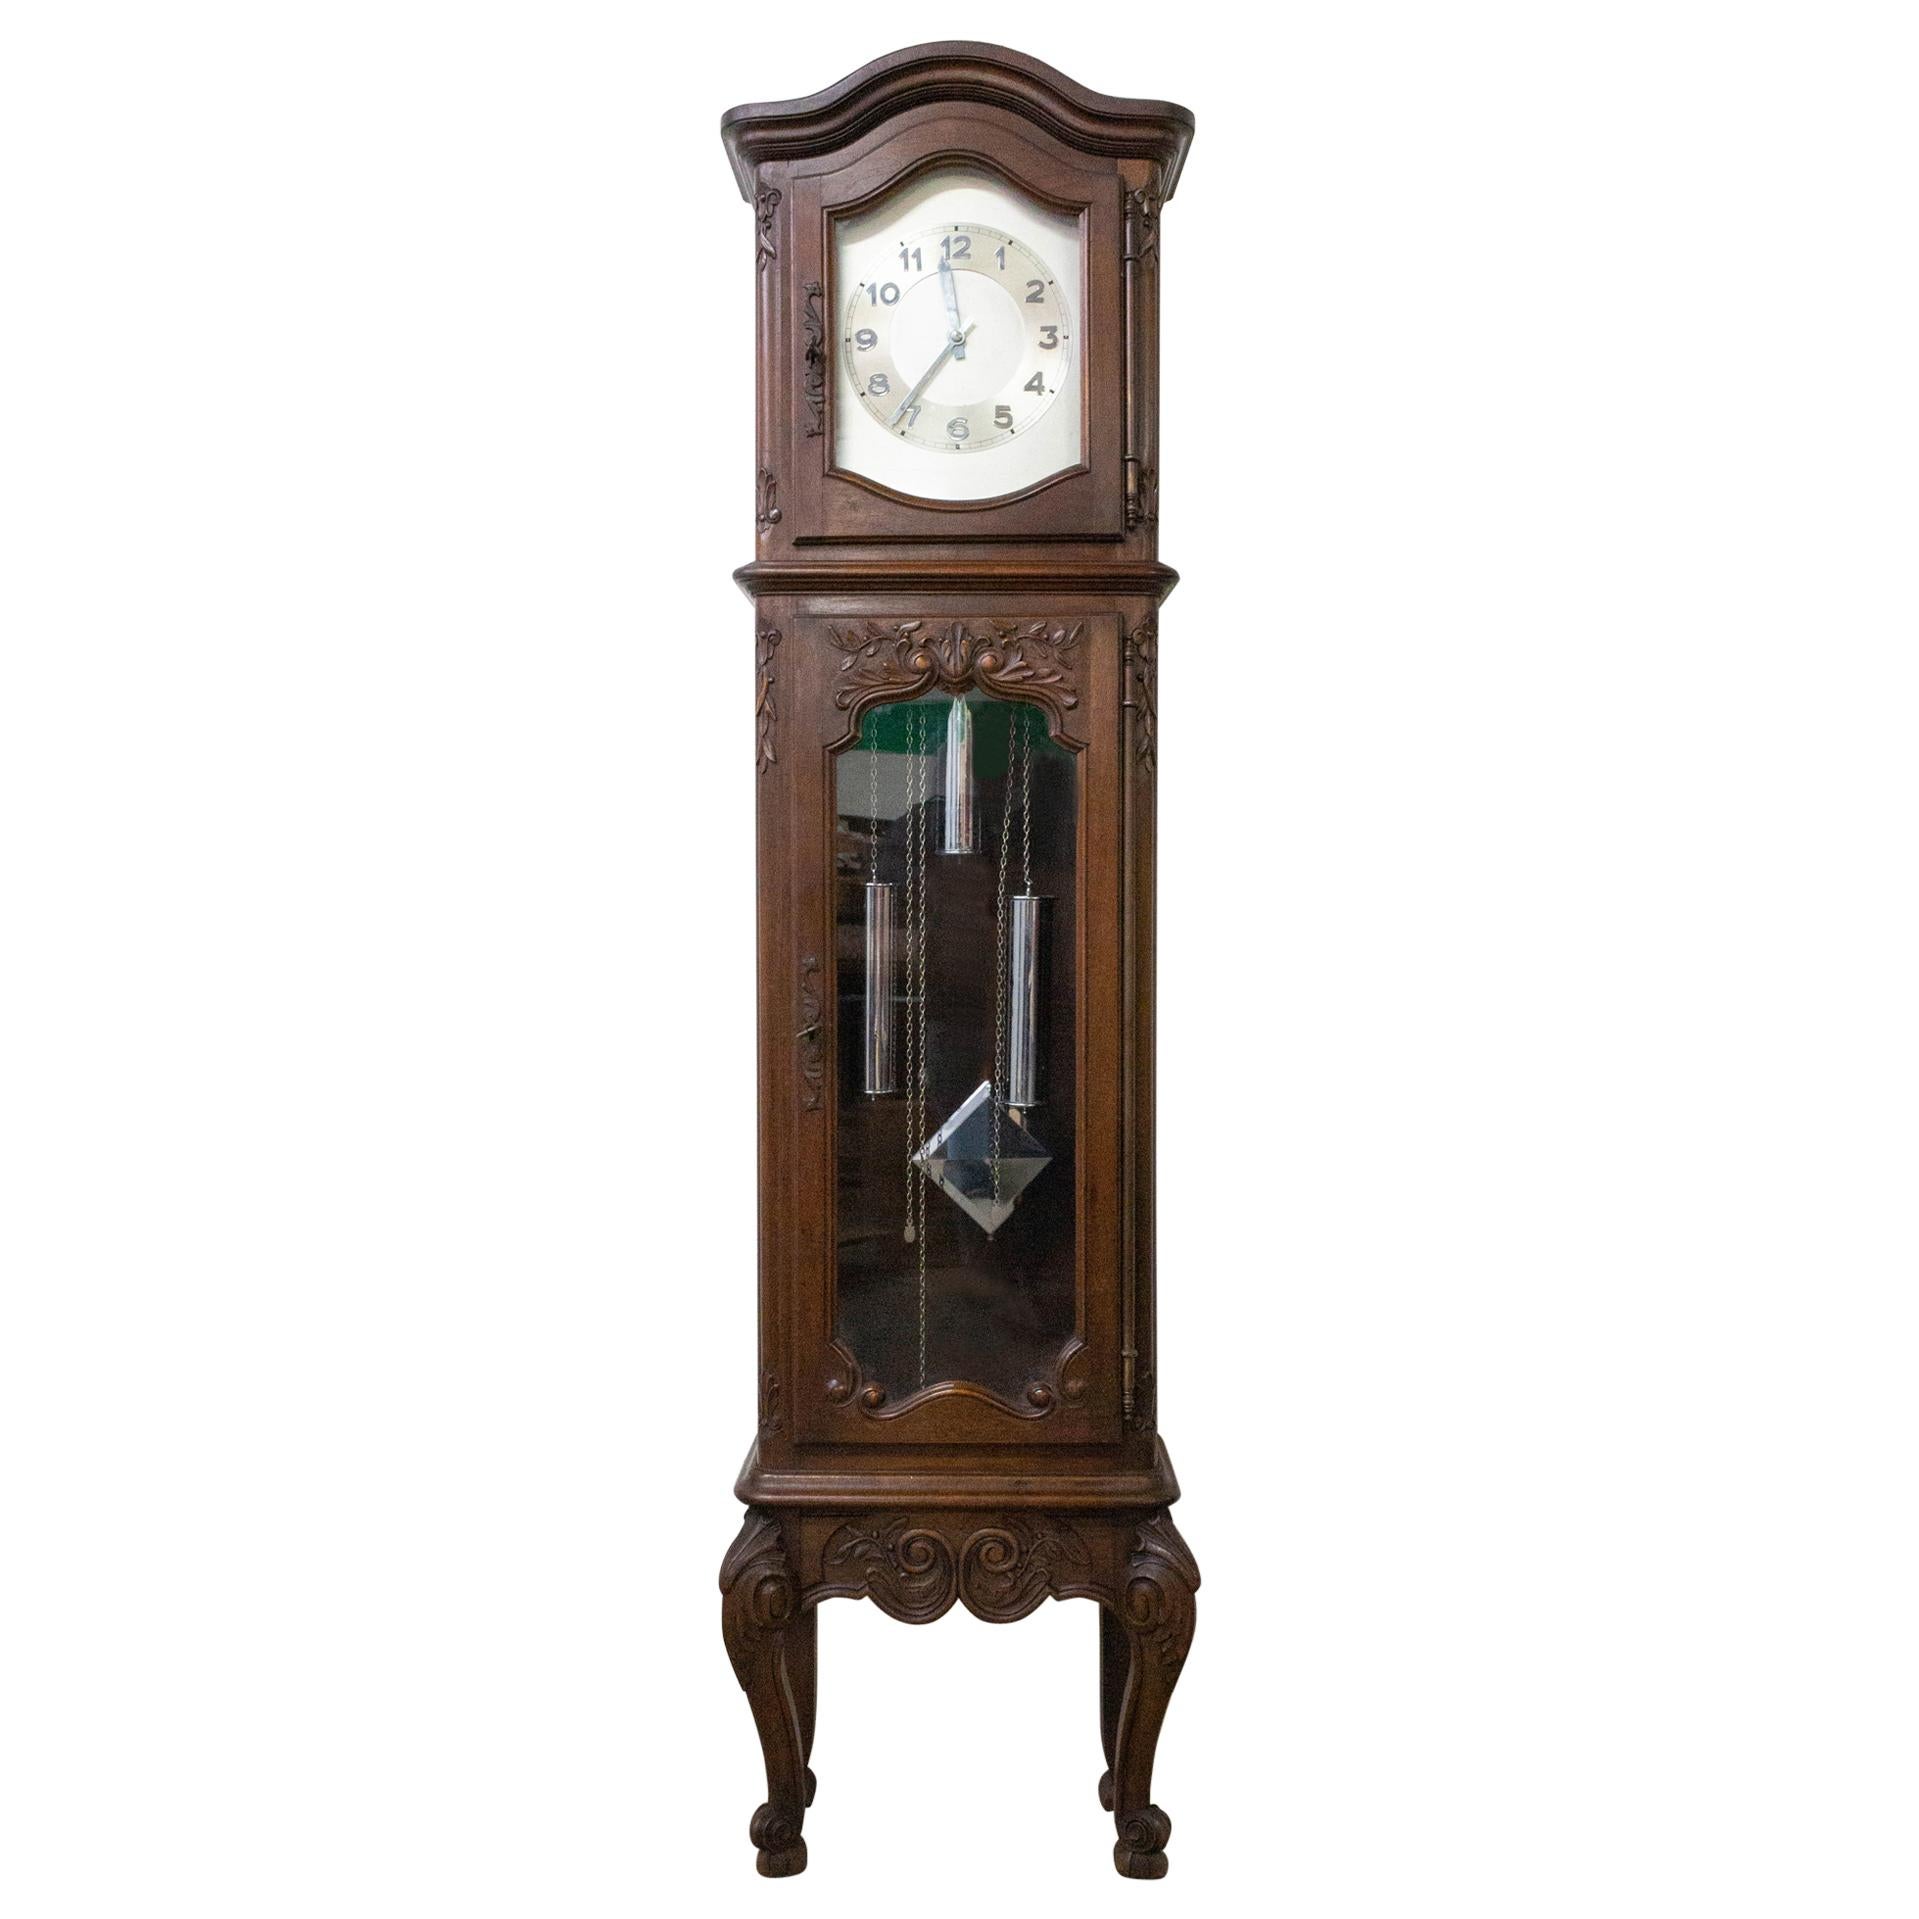 How do I get my grandfather clock to chime correctly?